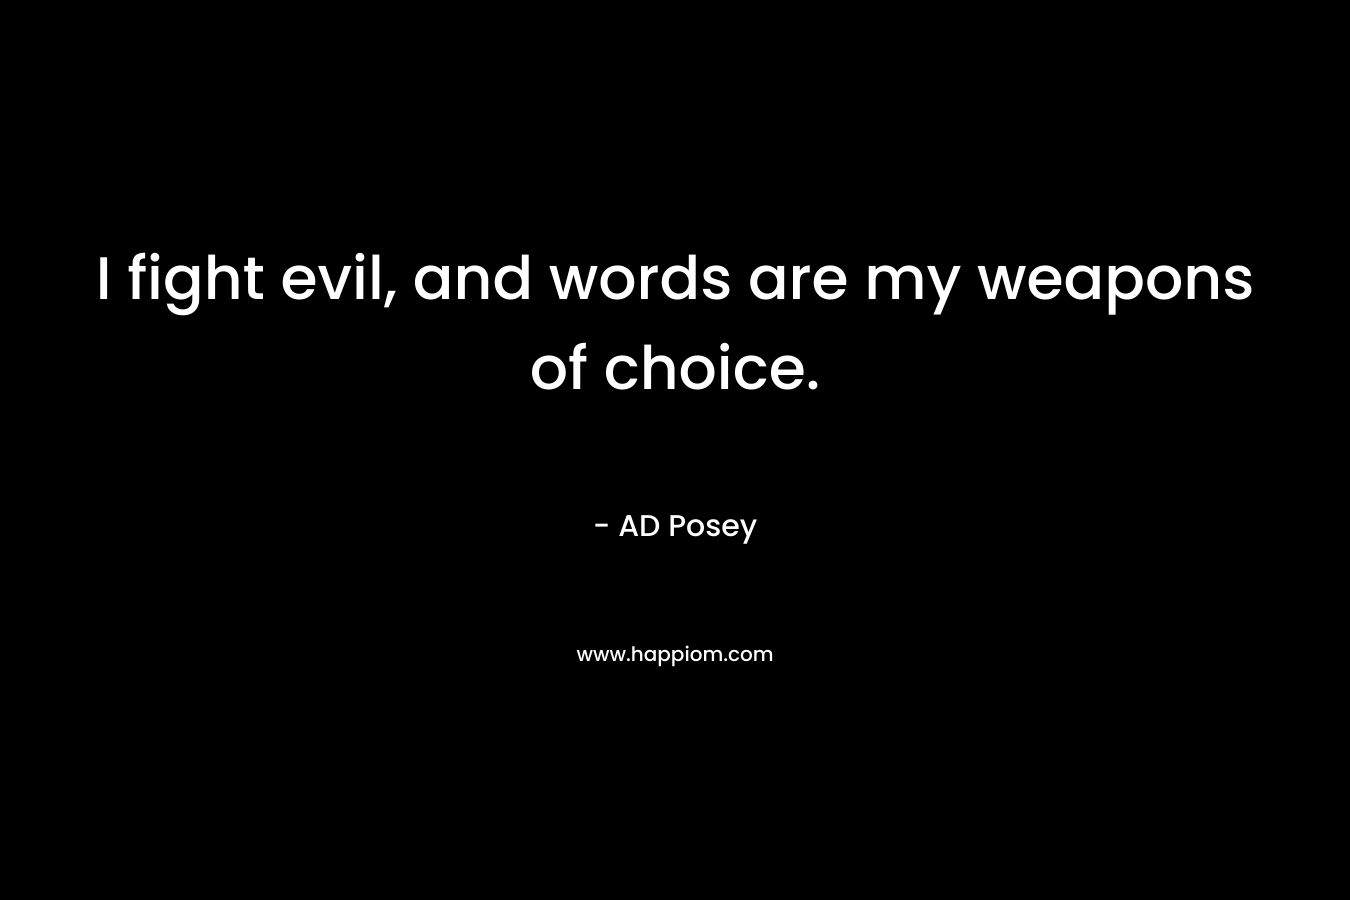 I fight evil, and words are my weapons of choice.